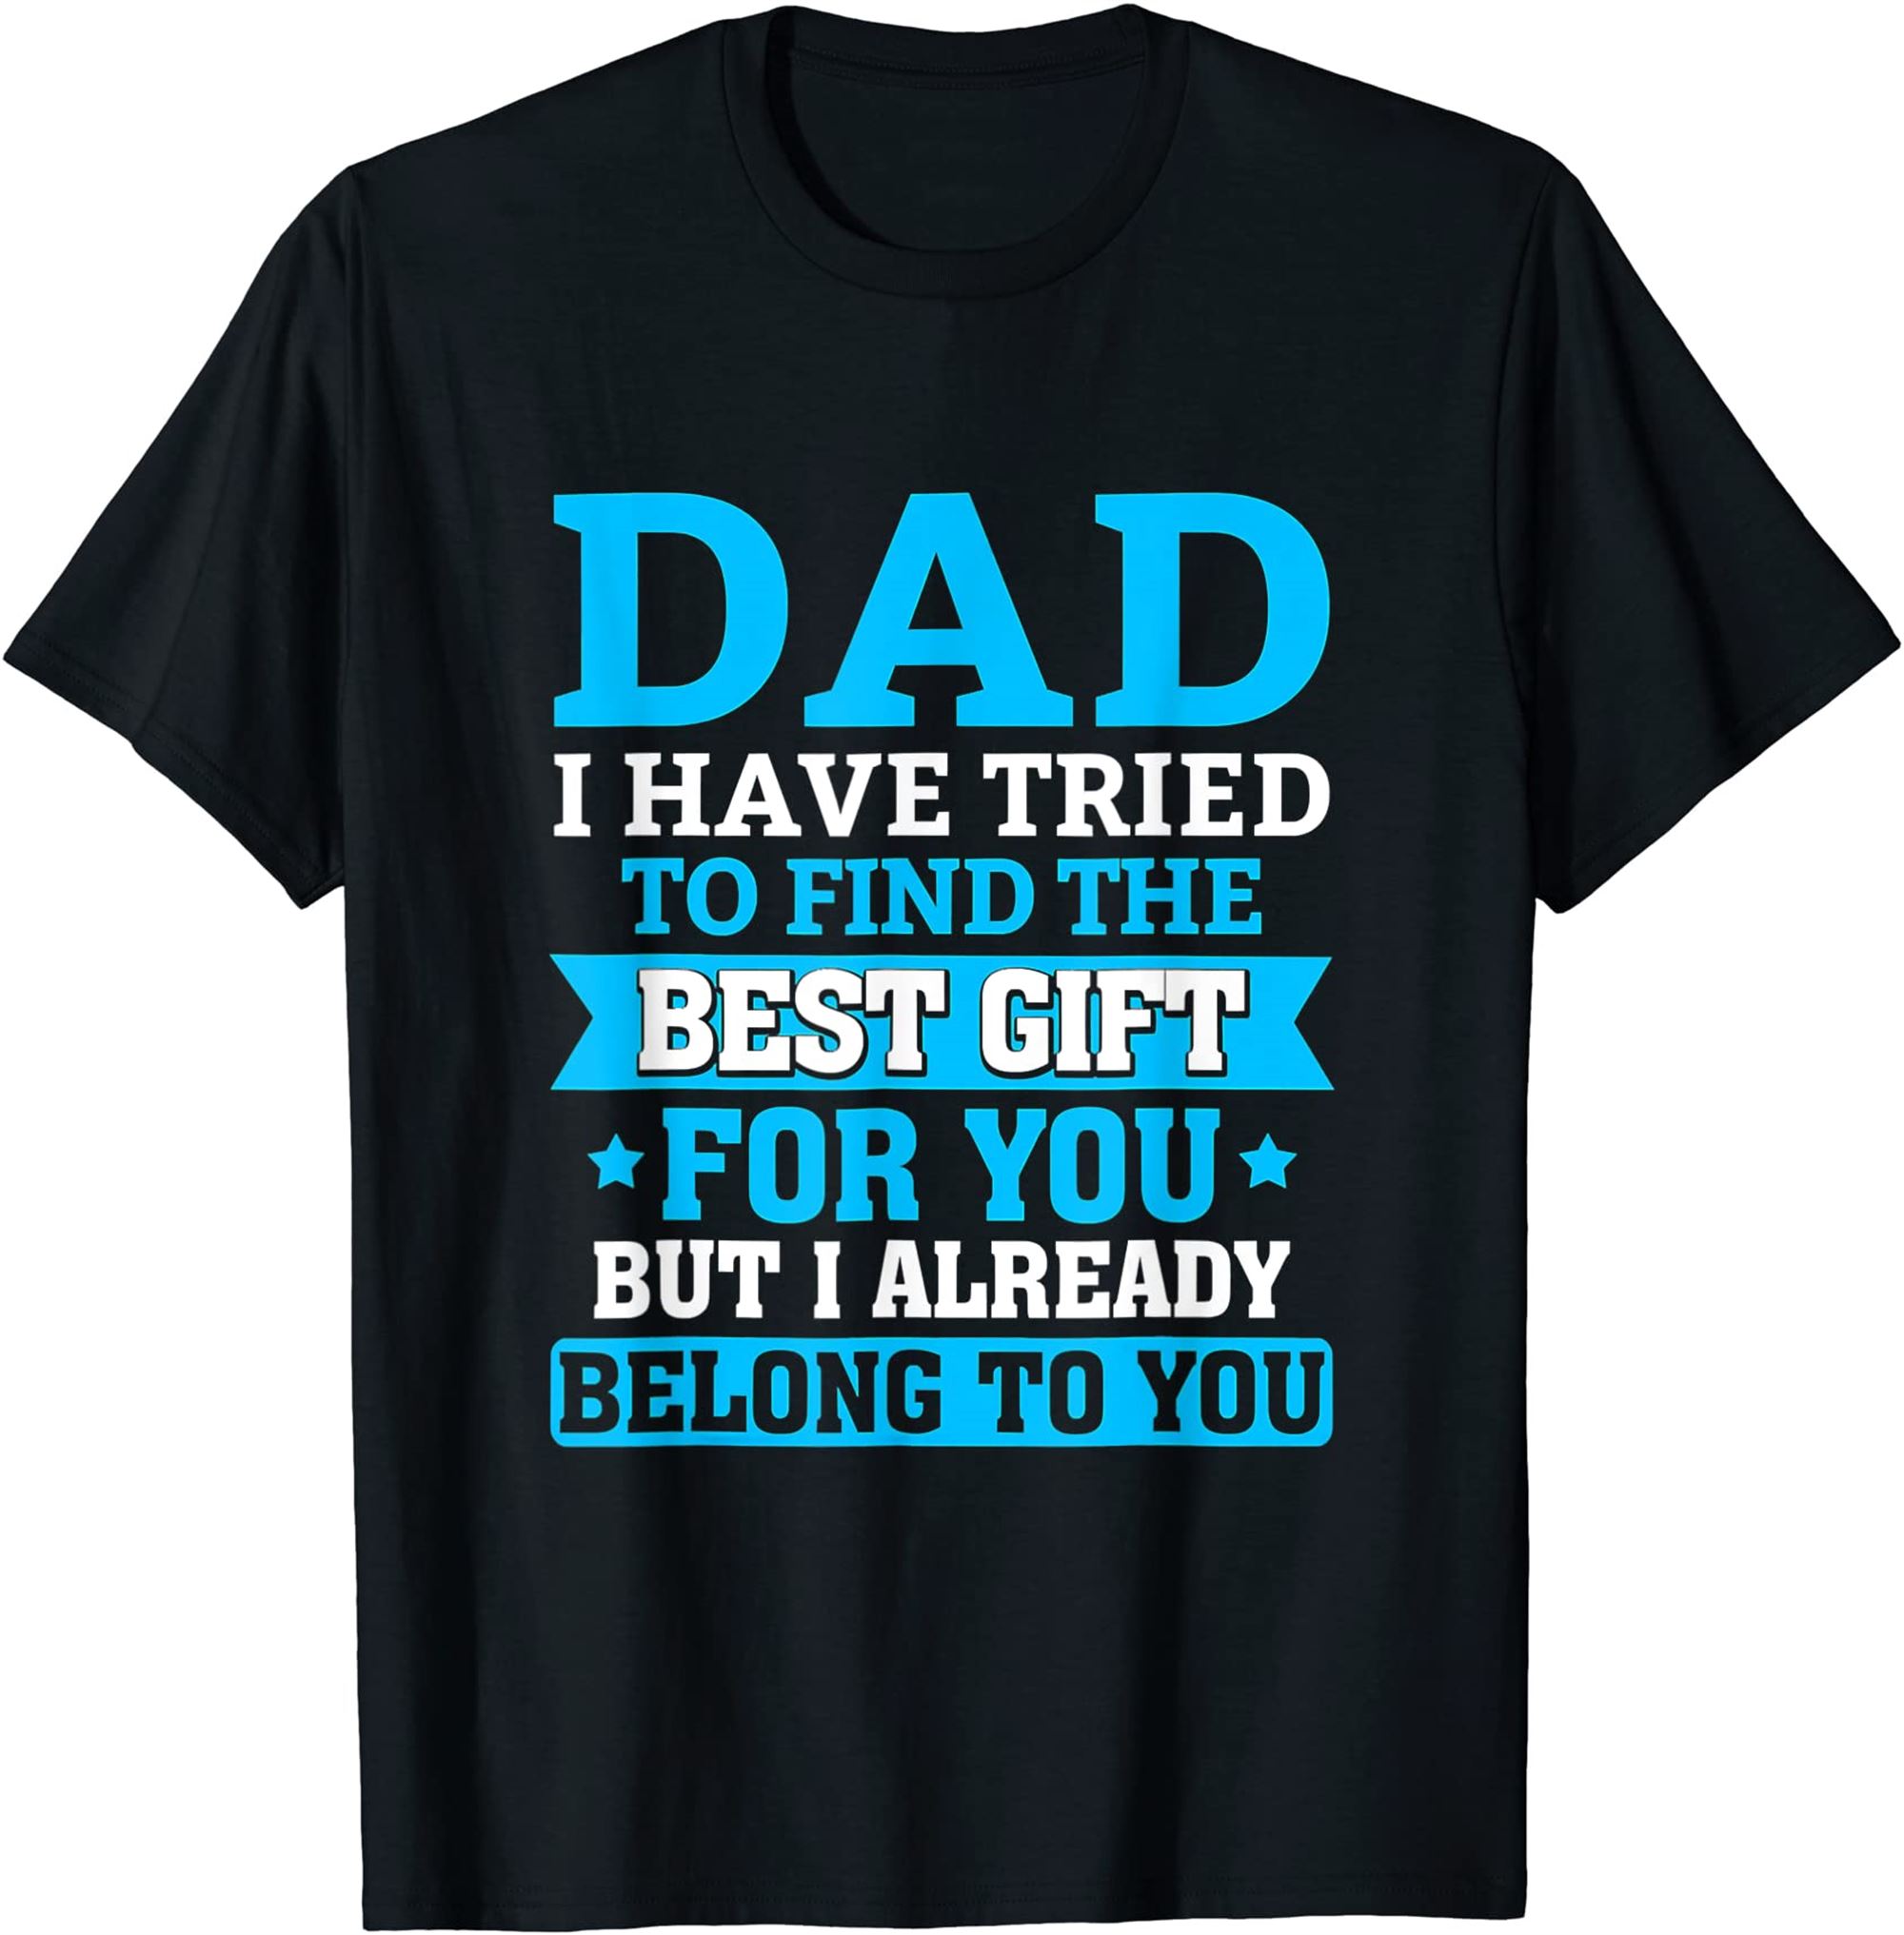 Funny Fathers Day Shirt Dad From Daughter Son Wife For Daddy T-shirt Size Up To 5xl